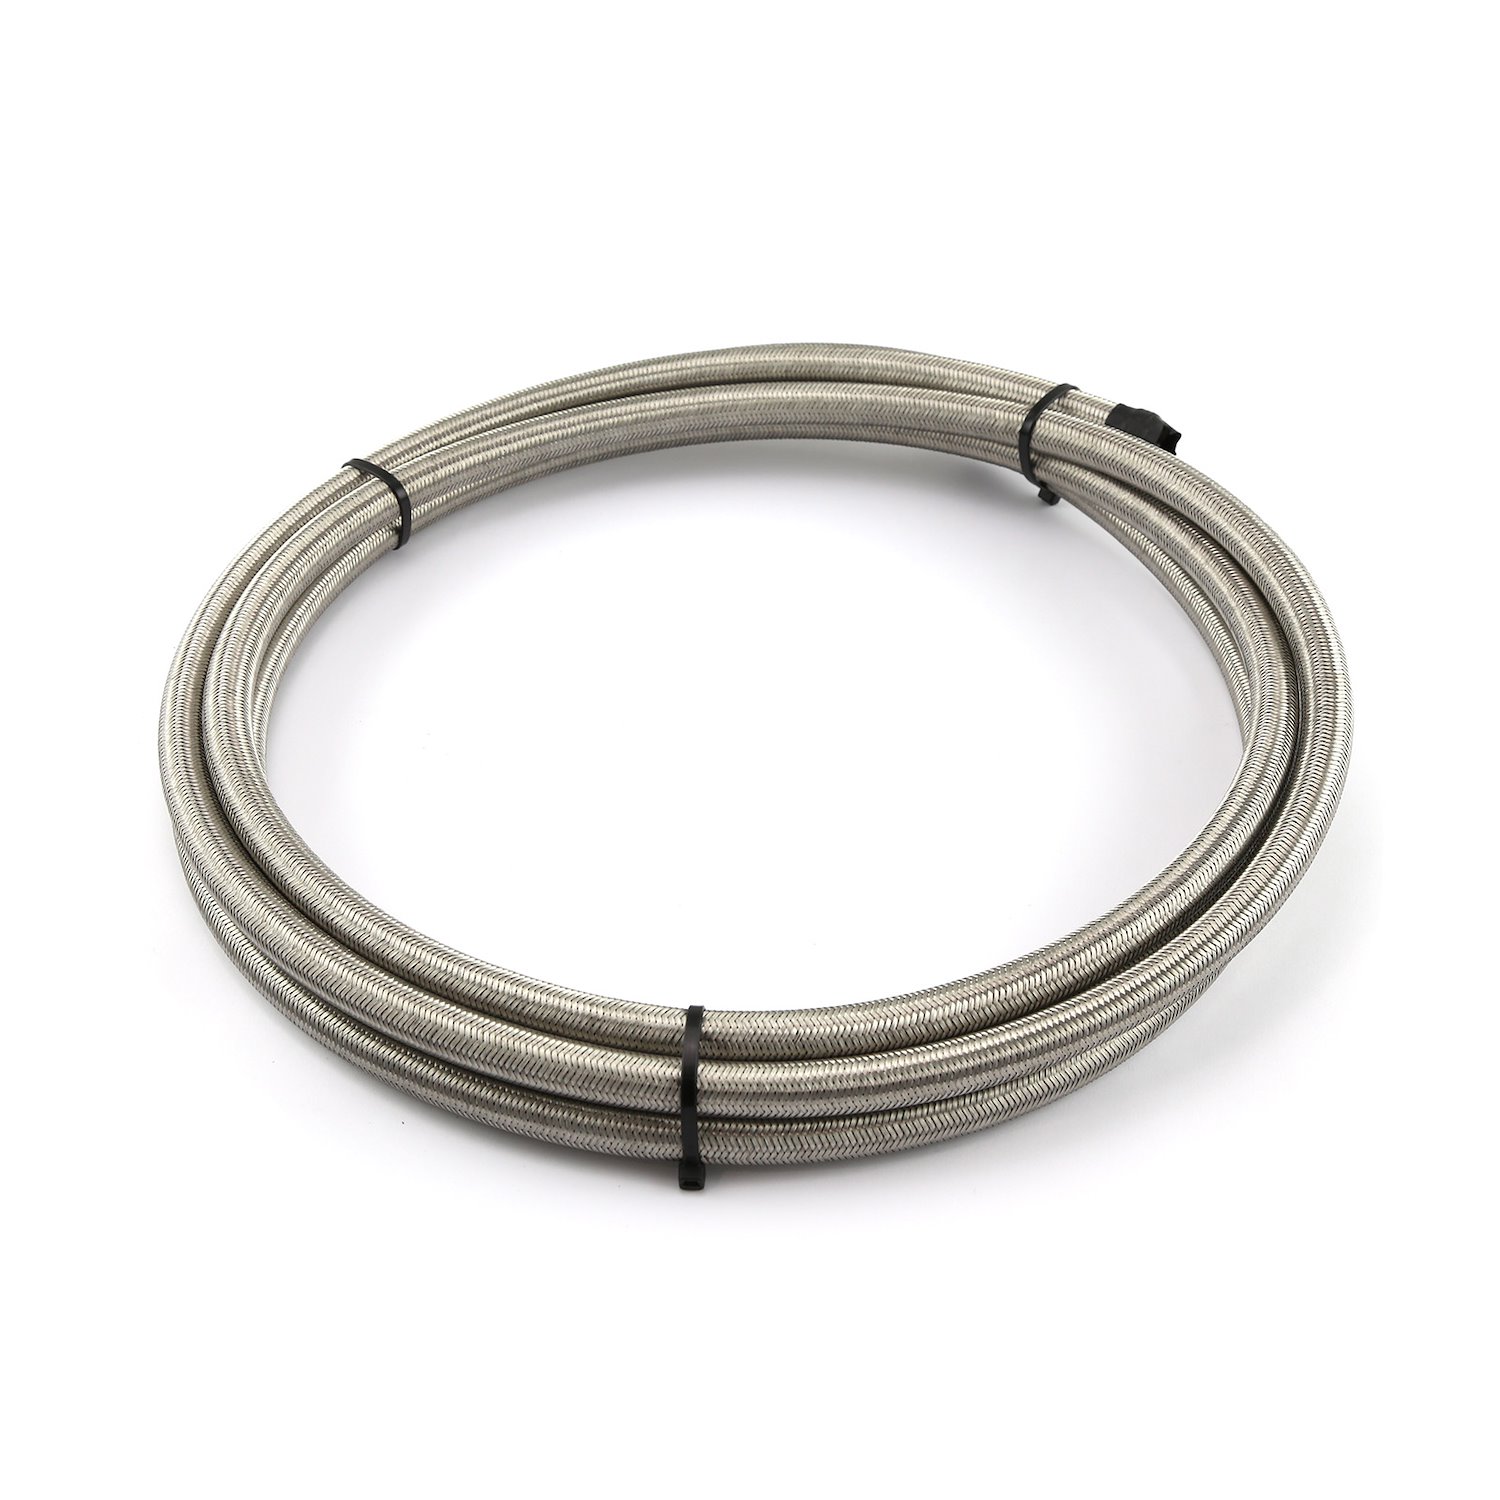 100 Series Stainless Steel Braided Hose -6 AN